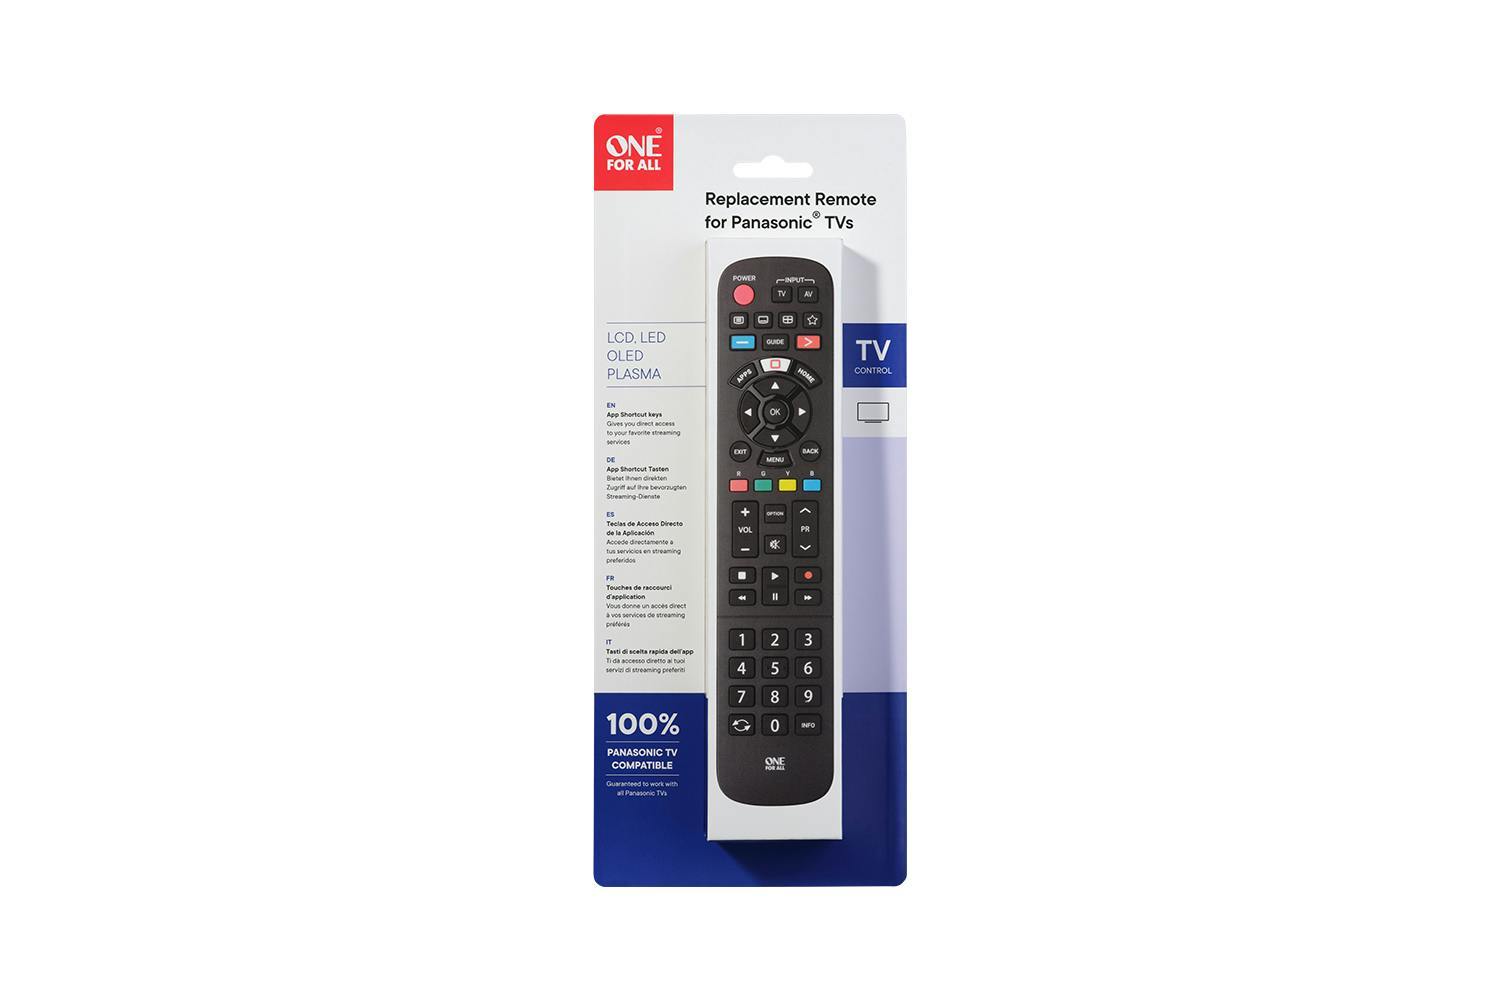 One For All Panasonic Replacement Remote